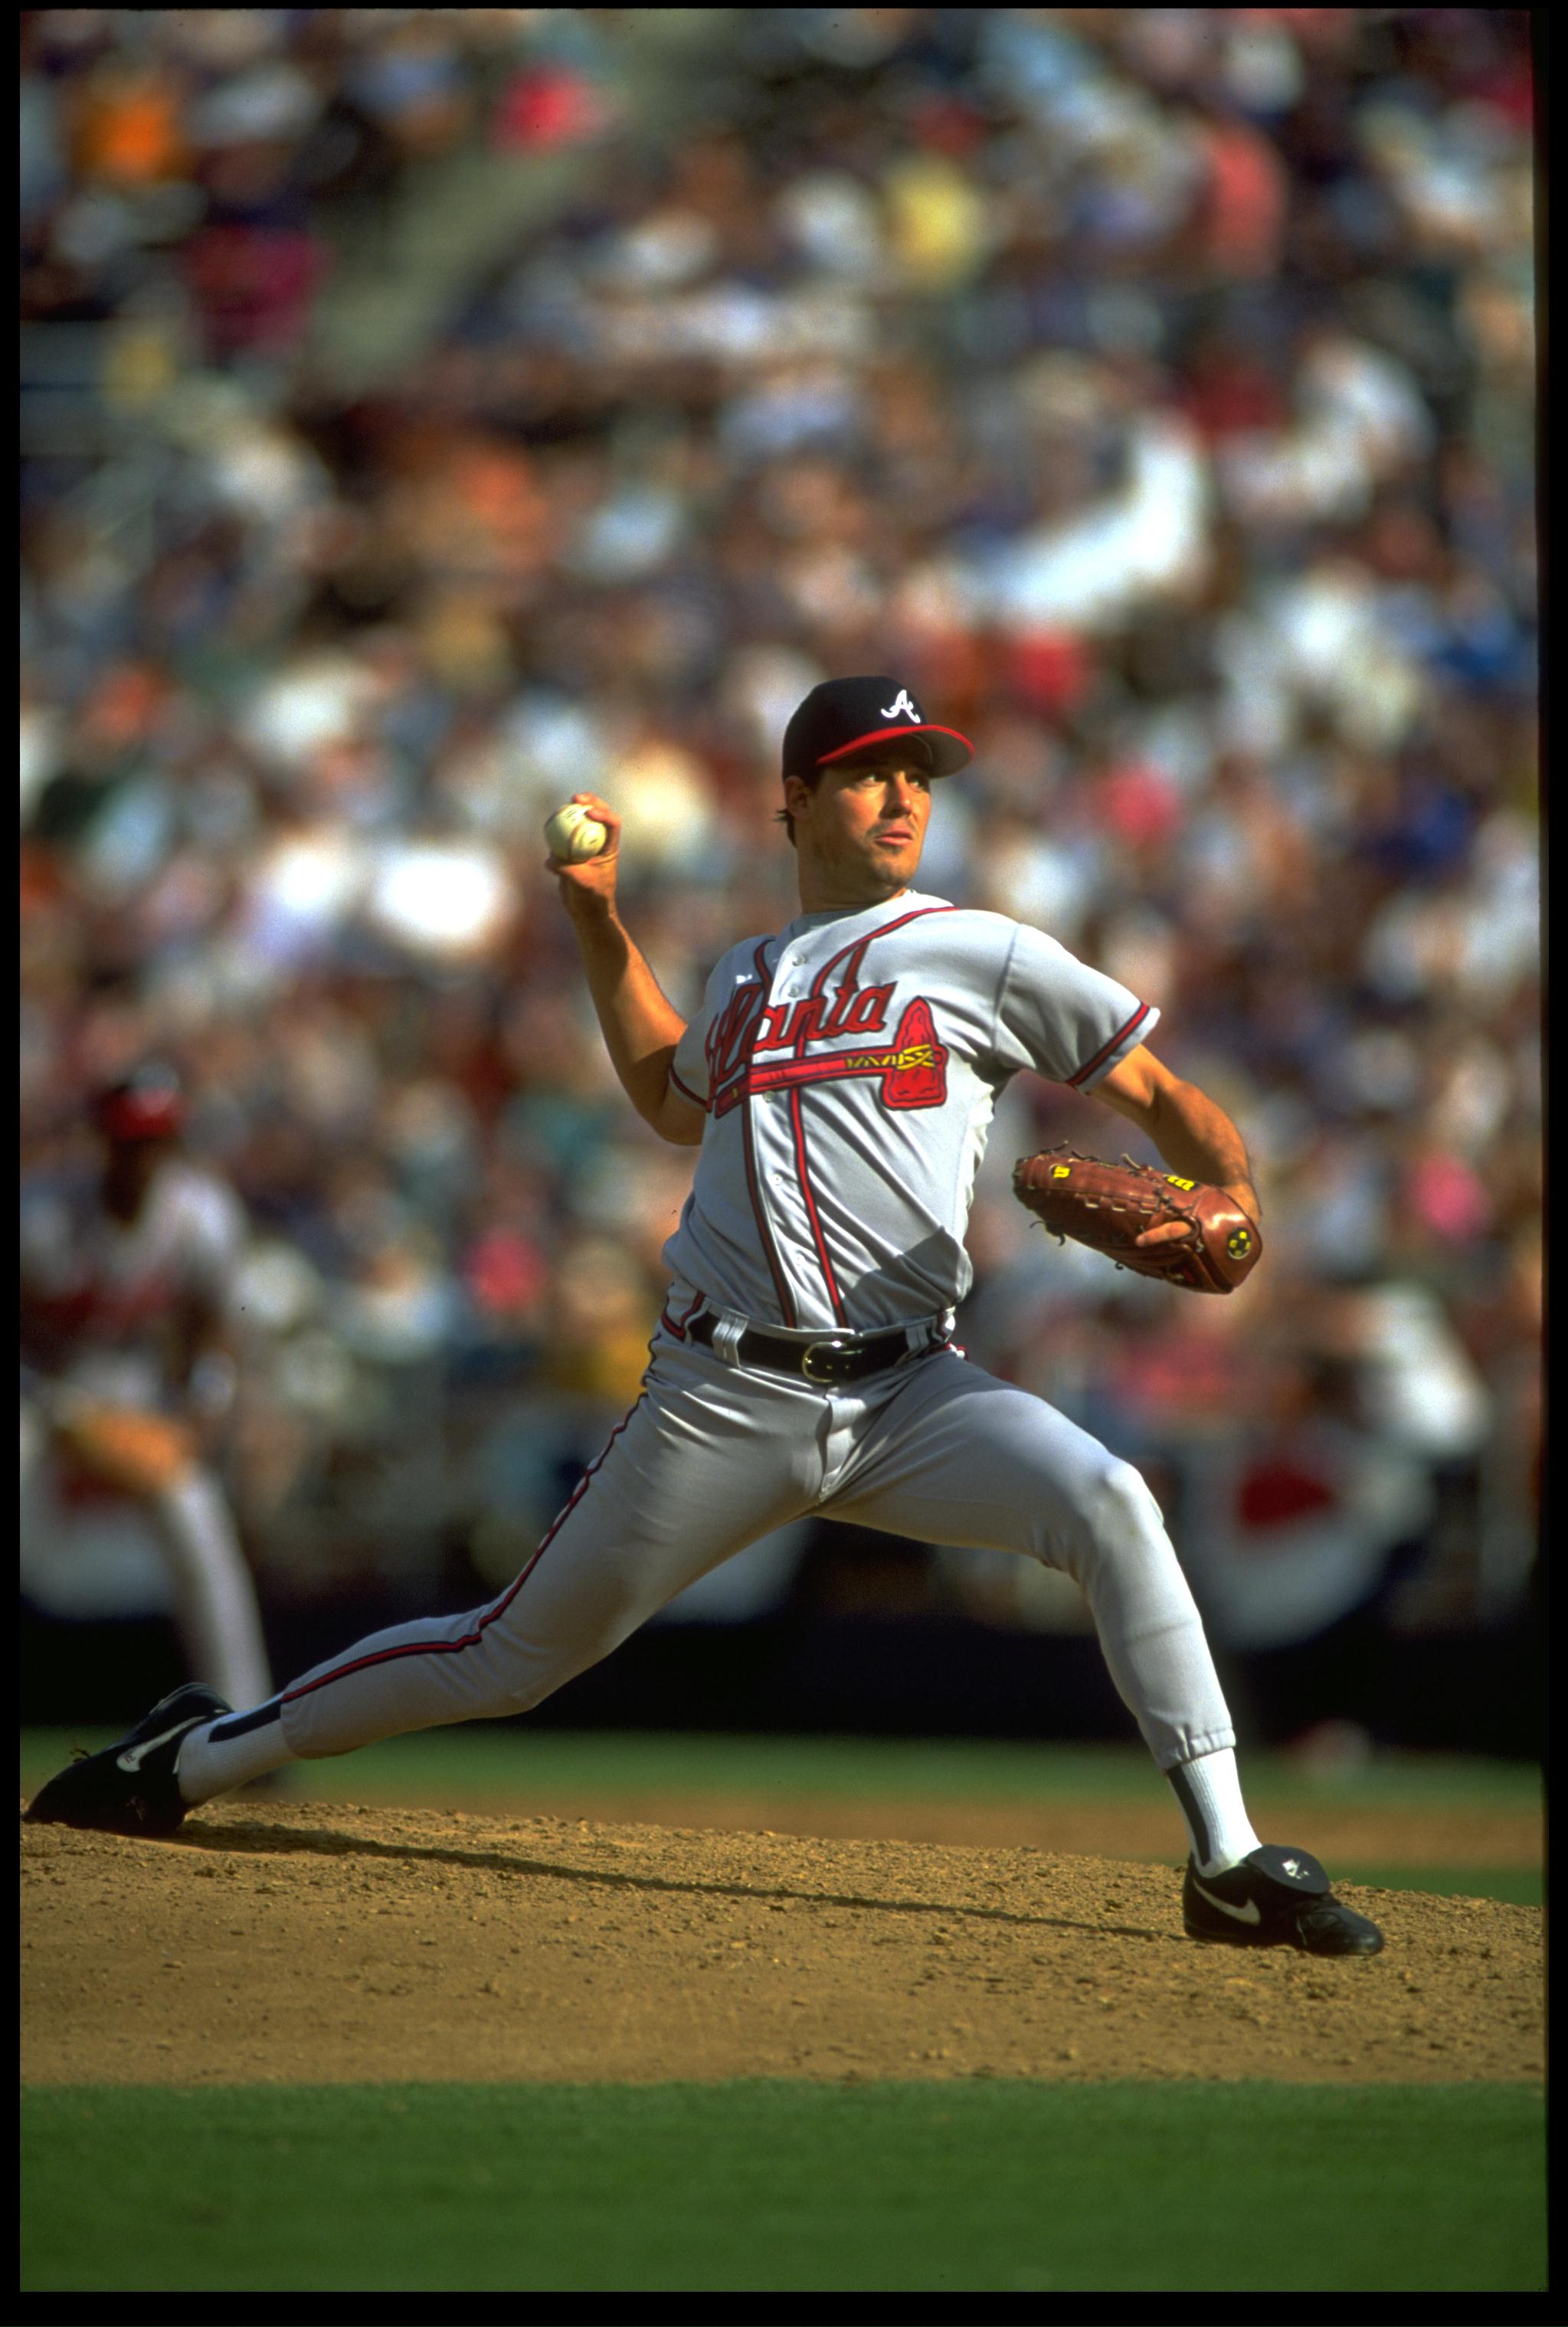 Maddux returns to Atlanta, throws out ceremonial first pitch